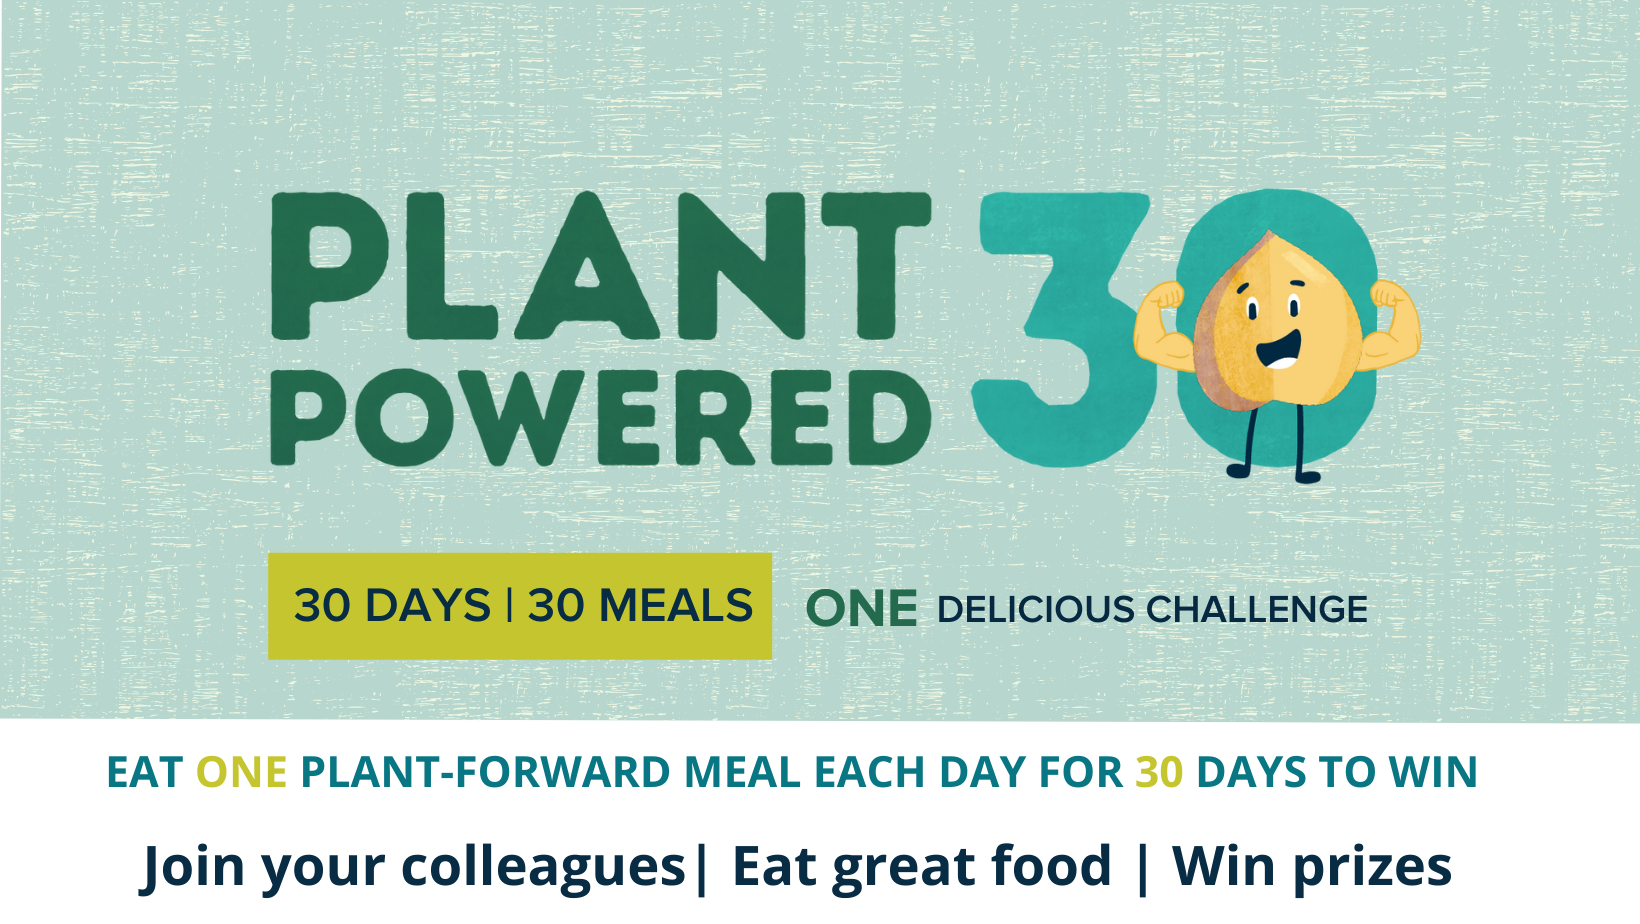 Plant Powered 30 featured image